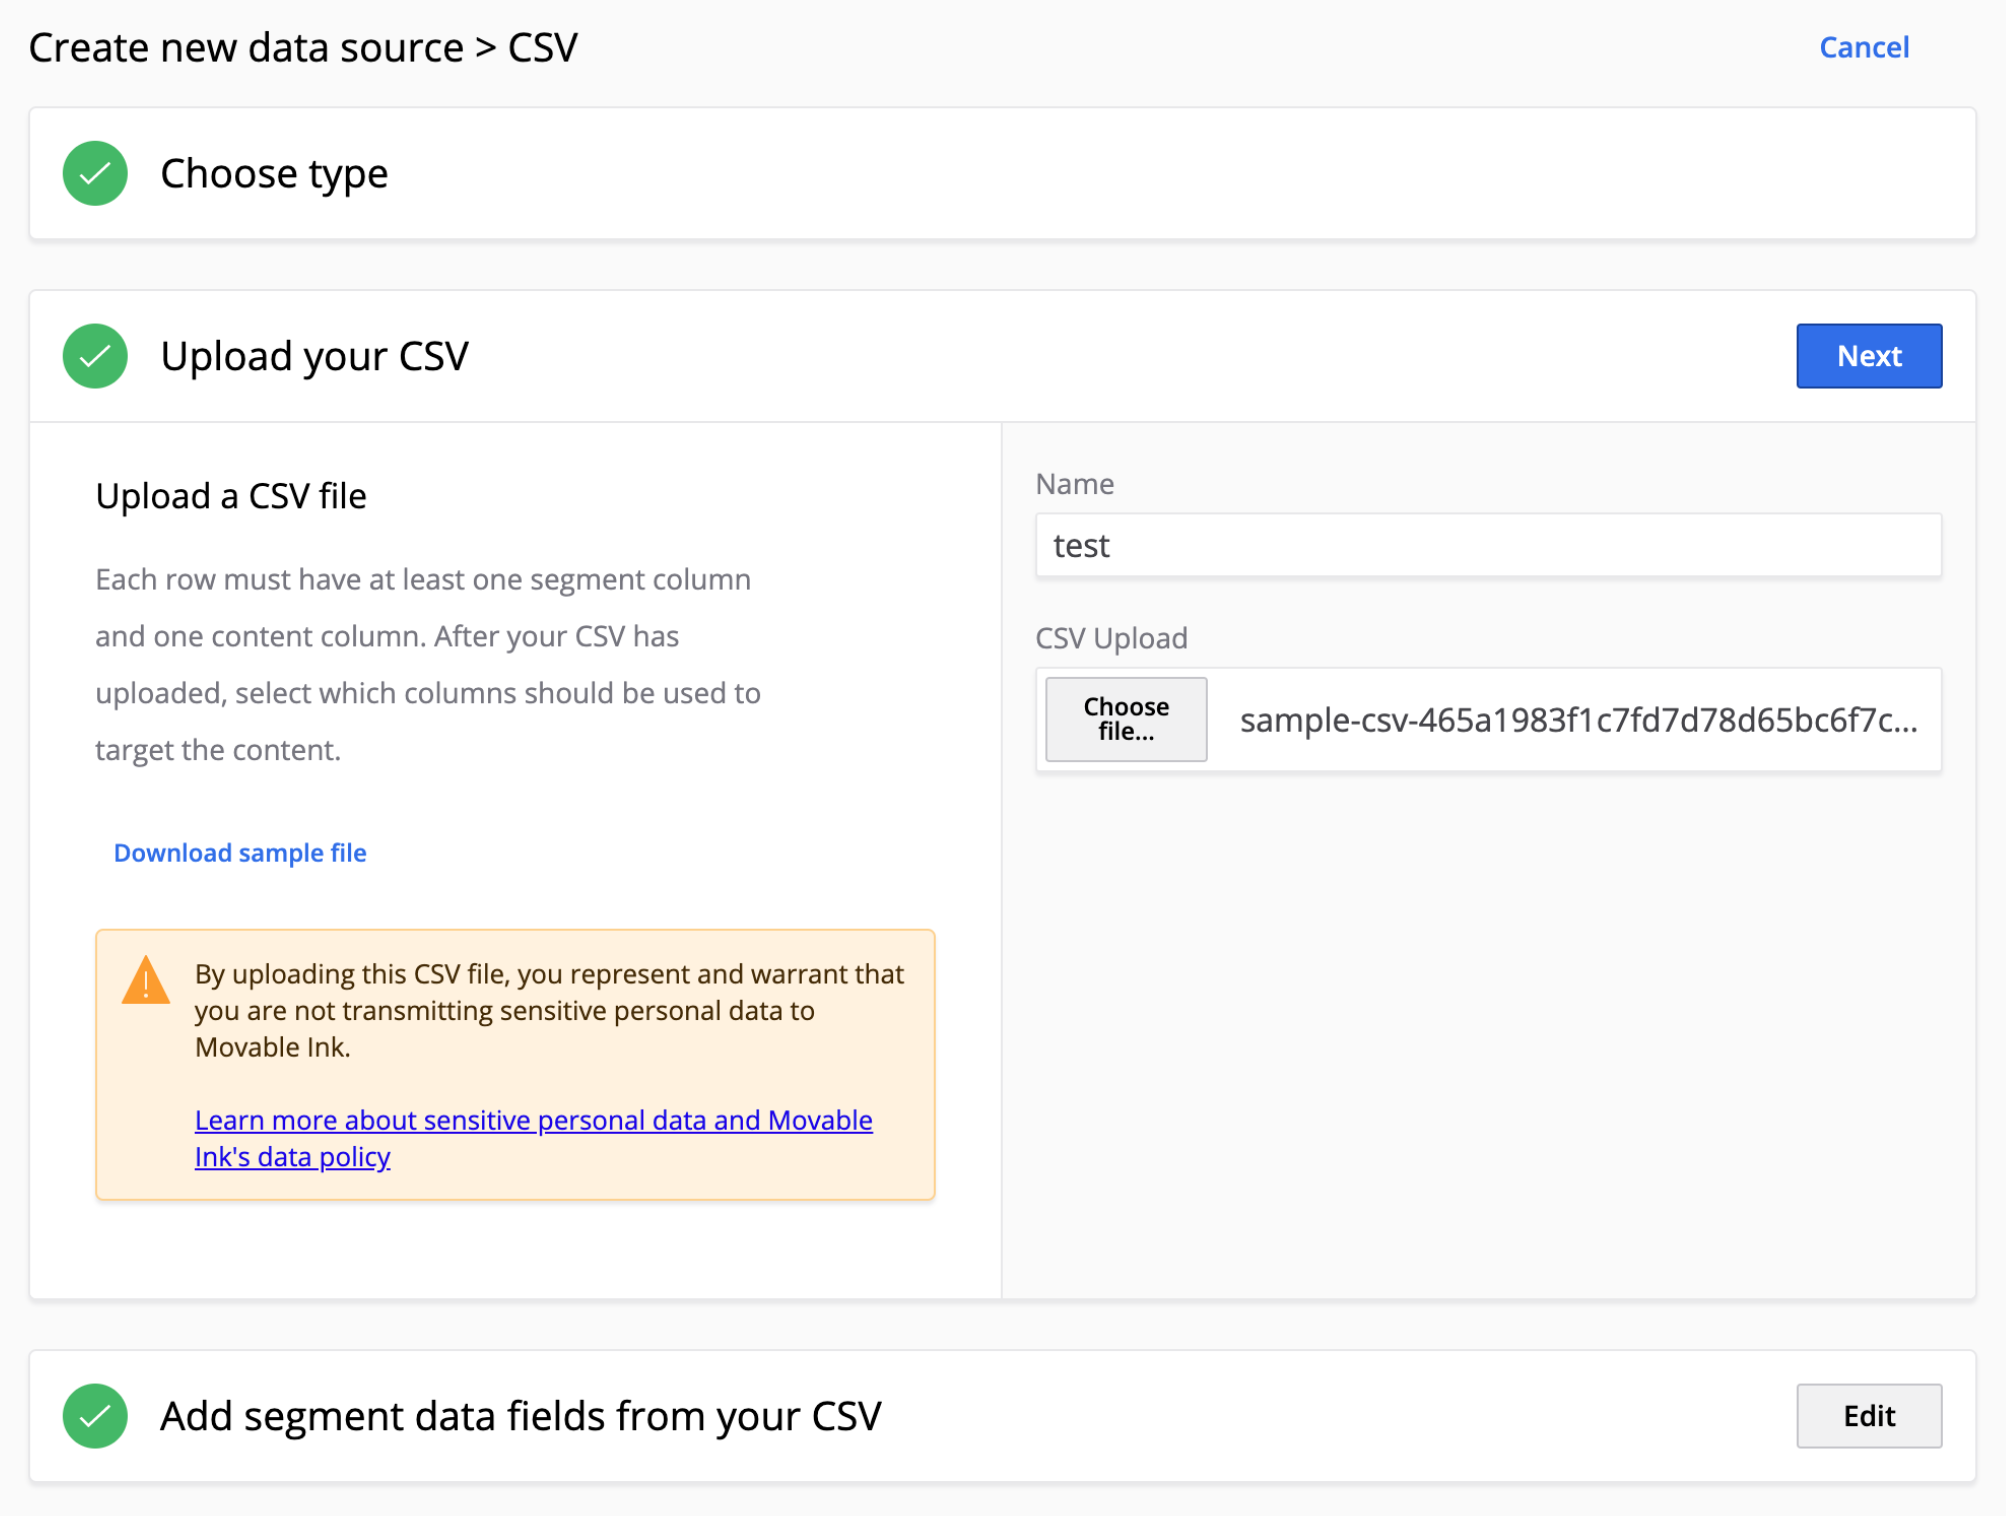 The fields that will show up when selecting "CSV" as your data source.